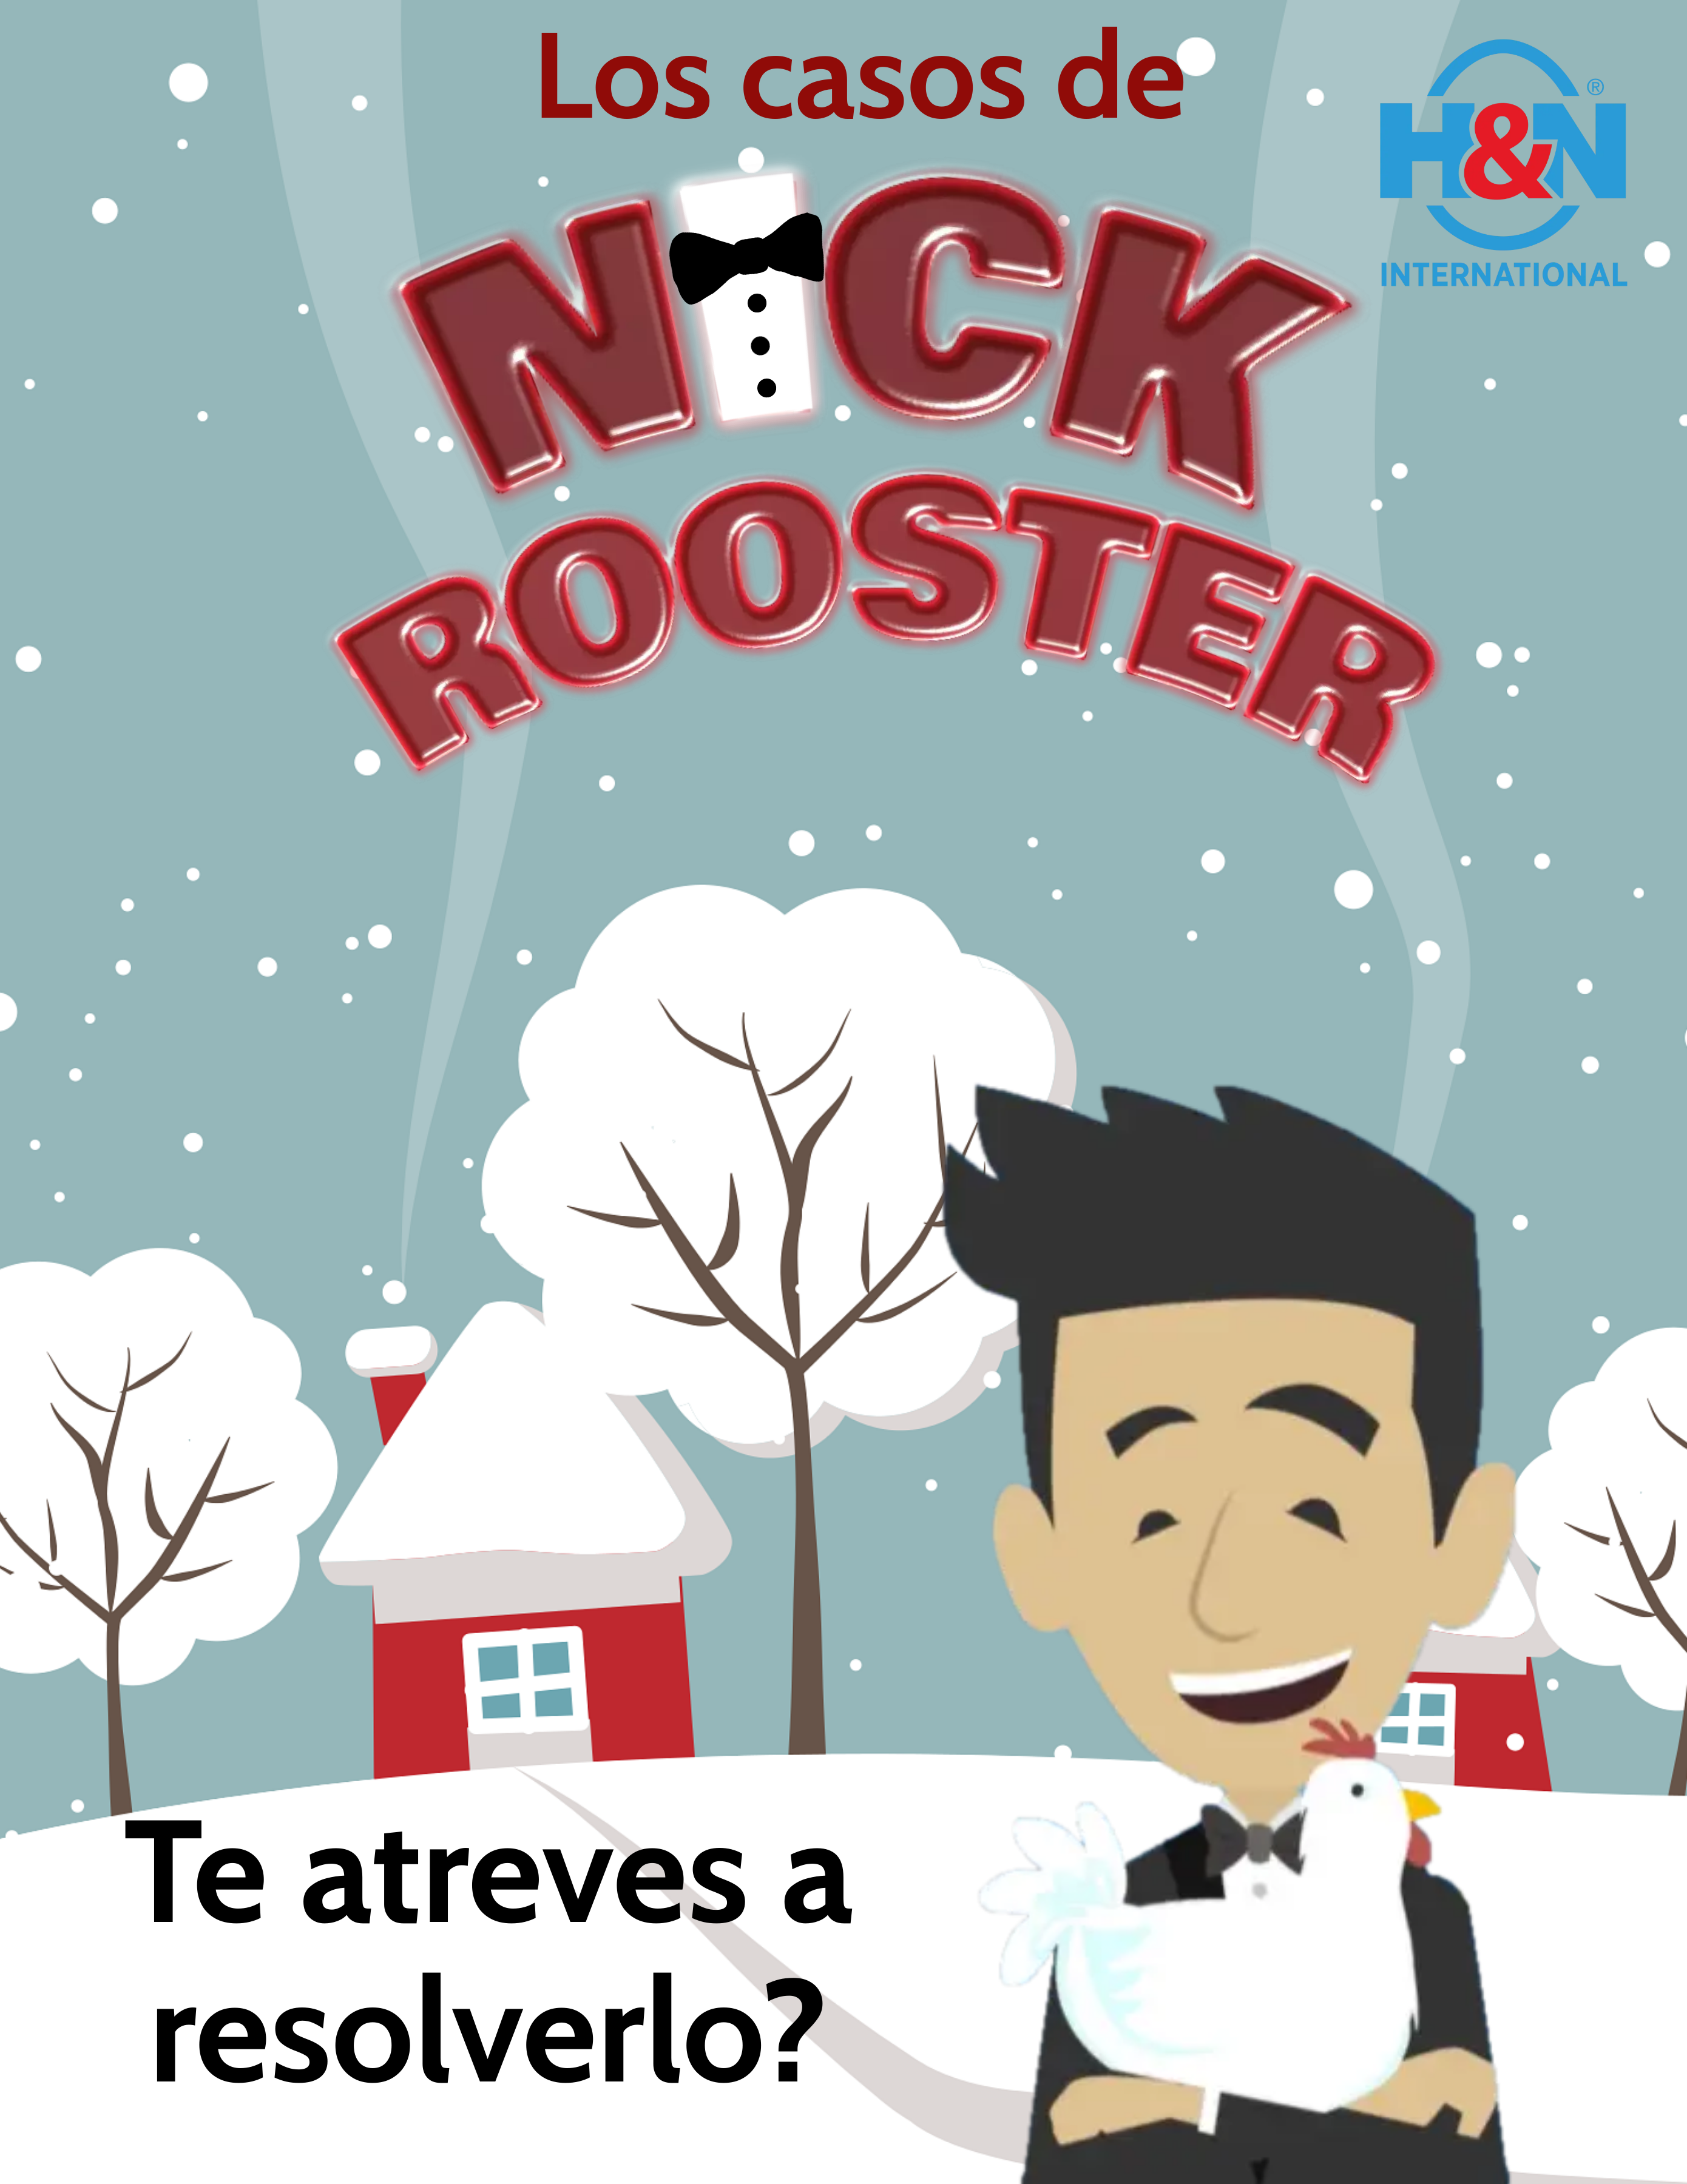 Nick Rooster caso no. 15